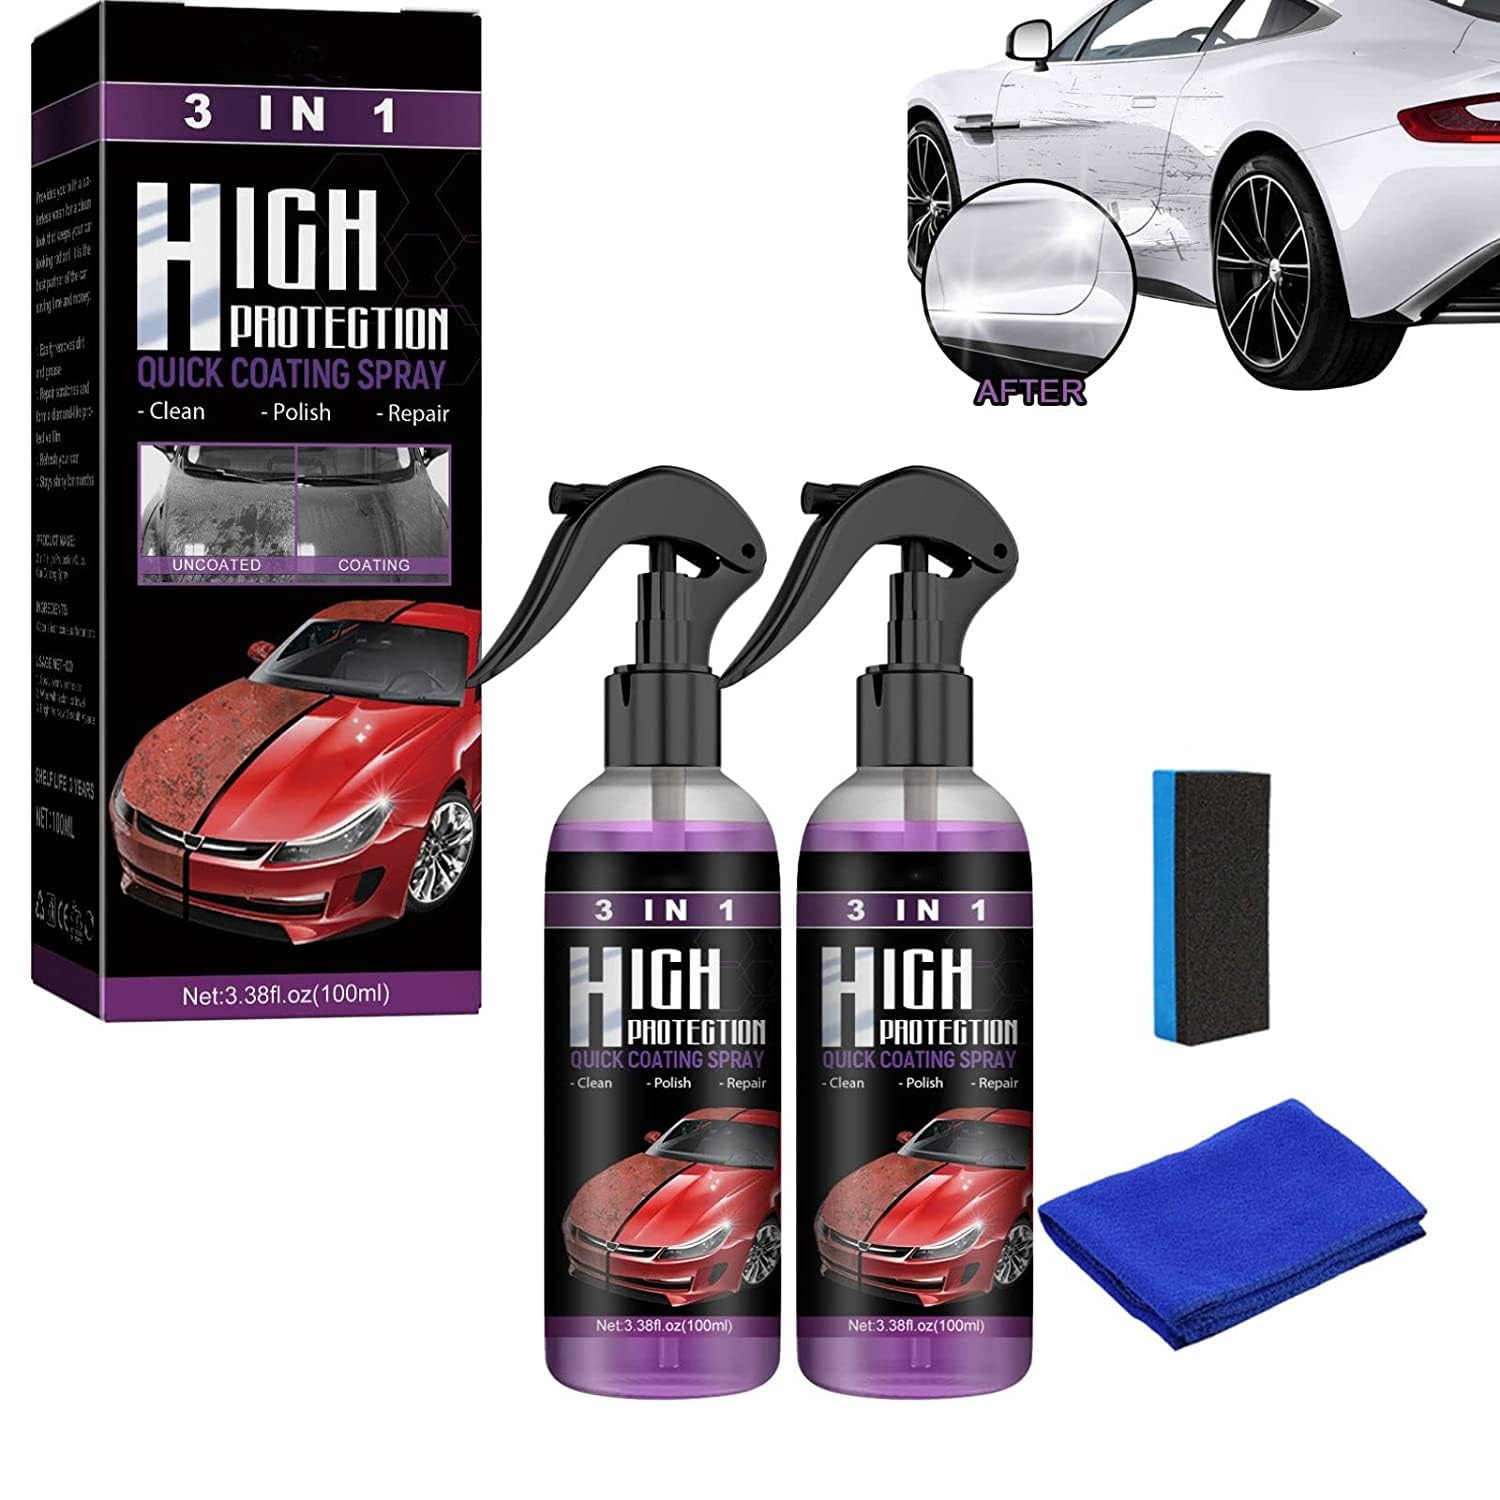 2PCS 3 in 1 high Protection Quick Coating Spray, Fast [...]